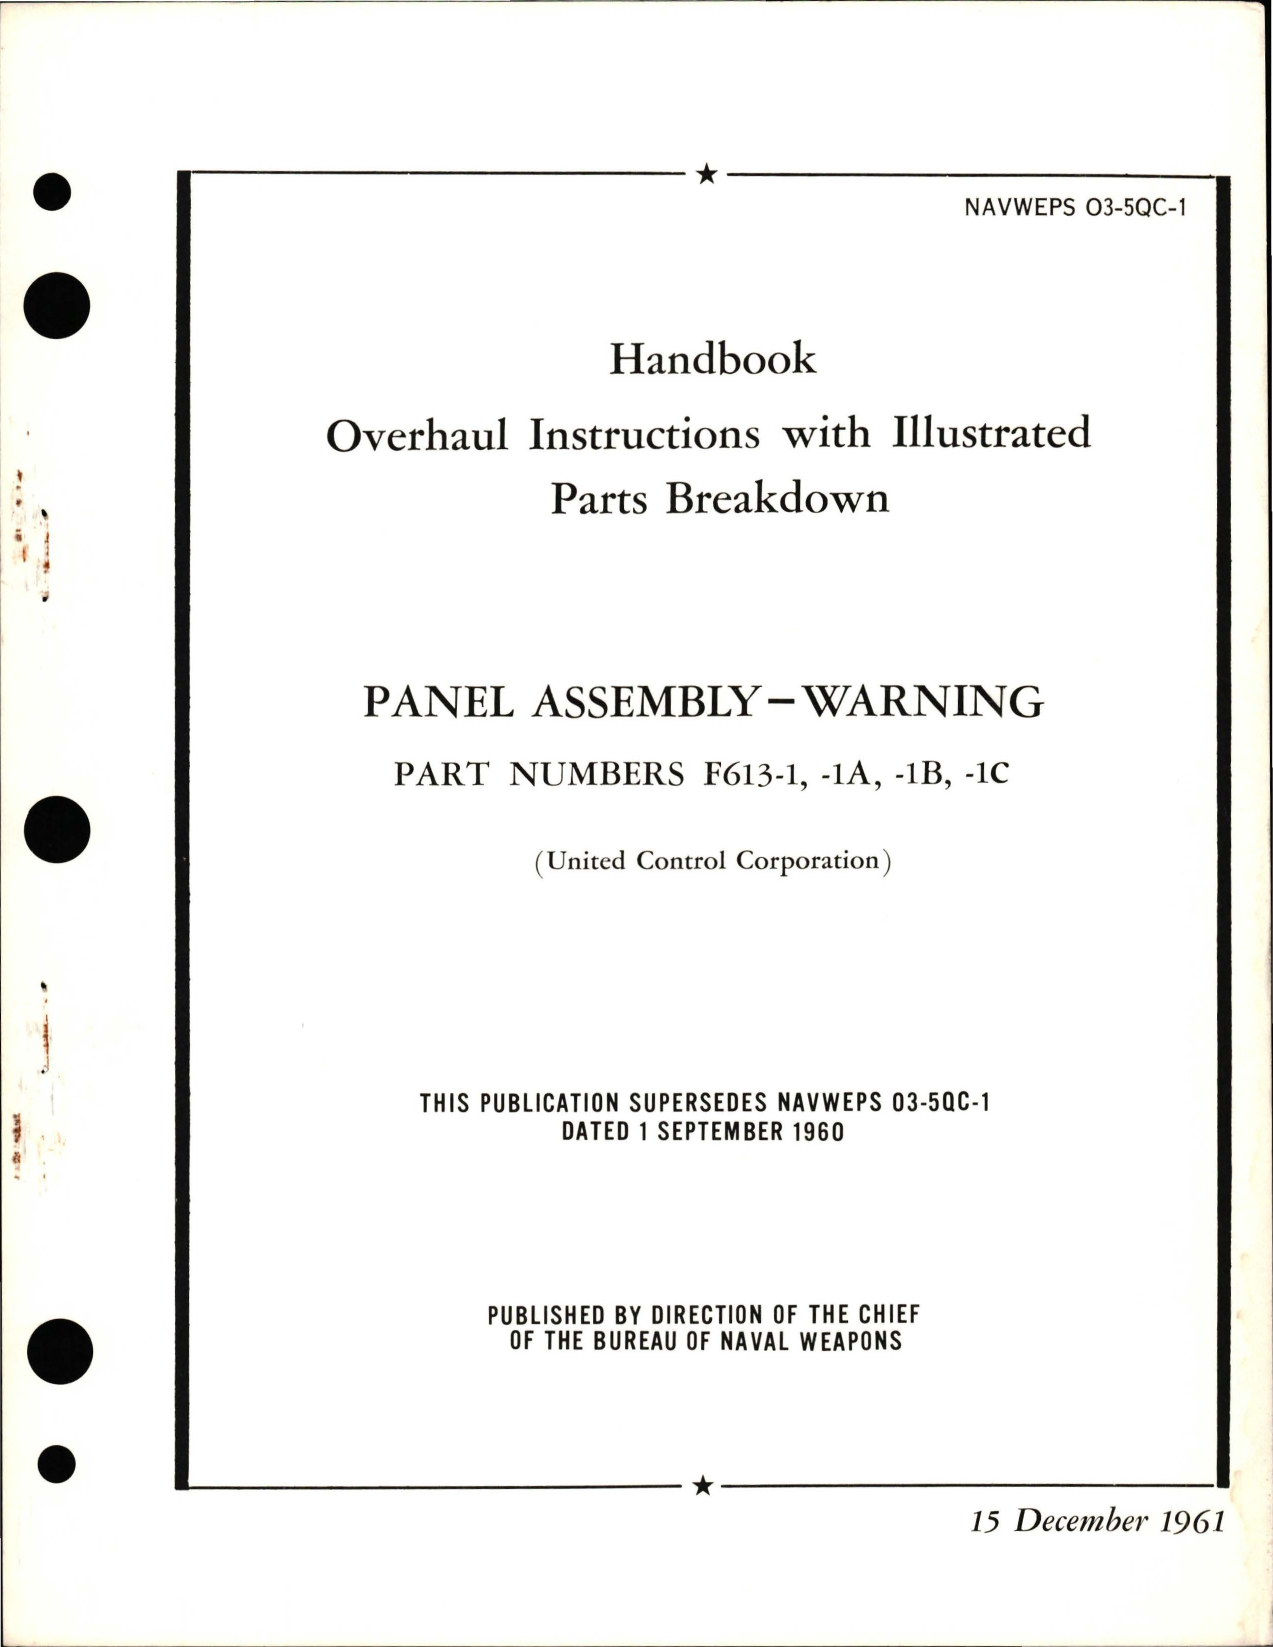 Sample page 1 from AirCorps Library document: Overhaul Instructions with Illustrated Parts Breakdown for Warning Panel Assembly